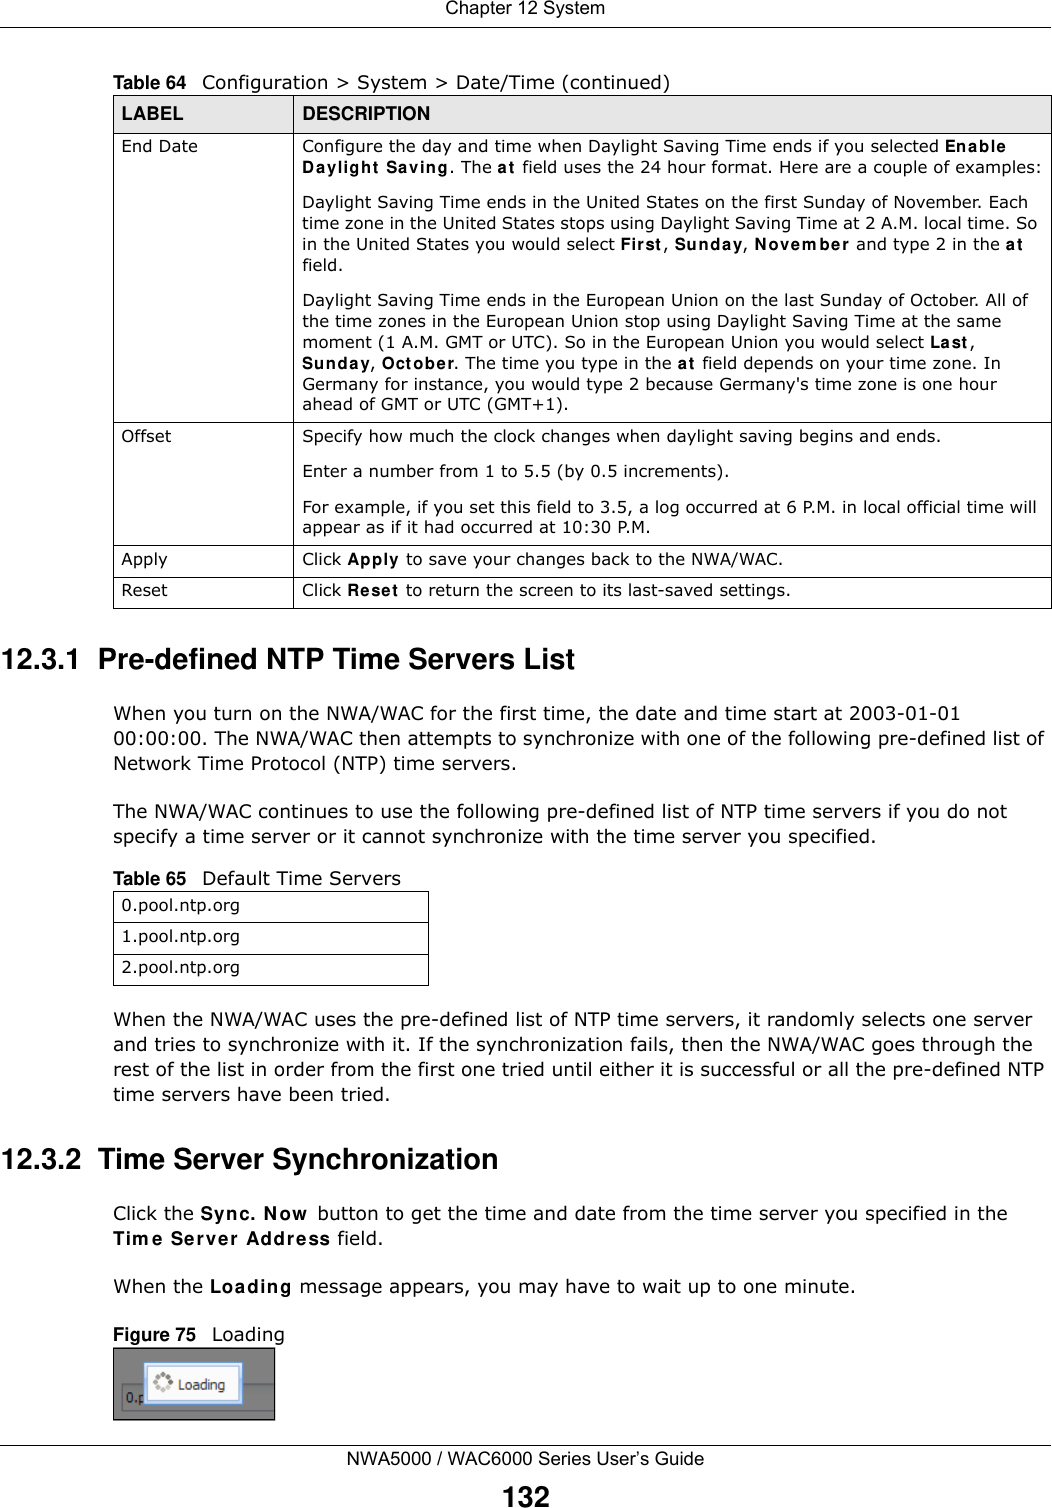 Chapter 12 SystemNWA5000 / WAC6000 Series User’s Guide13212.3.1  Pre-defined NTP Time Servers ListWhen you turn on the NWA/WAC for the first time, the date and time start at 2003-01-01 00:00:00. The NWA/WAC then attempts to synchronize with one of the following pre-defined list of Network Time Protocol (NTP) time servers.The NWA/WAC continues to use the following pre-defined list of NTP time servers if you do not specify a time server or it cannot synchronize with the time server you specified. When the NWA/WAC uses the pre-defined list of NTP time servers, it randomly selects one server and tries to synchronize with it. If the synchronization fails, then the NWA/WAC goes through the rest of the list in order from the first one tried until either it is successful or all the pre-defined NTP time servers have been tried.12.3.2  Time Server SynchronizationClick the Sync. N ow  button to get the time and date from the time server you specified in the Tim e Server  Addr ess field.When the Loa ding message appears, you may have to wait up to one minute.Figure 75   LoadingEnd Date Configure the day and time when Daylight Saving Time ends if you selected Ena ble  Daylight  Sa ving. The a t  field uses the 24 hour format. Here are a couple of examples:Daylight Saving Time ends in the United States on the first Sunday of November. Each time zone in the United States stops using Daylight Saving Time at 2 A.M. local time. So in the United States you would select Fir st , Sunday, Novem ber  and type 2 in the at field.Daylight Saving Time ends in the European Union on the last Sunday of October. All of the time zones in the European Union stop using Daylight Saving Time at the same moment (1 A.M. GMT or UTC). So in the European Union you would select La st , Sunday, Oct ob er. The time you type in the at  field depends on your time zone. In Germany for instance, you would type 2 because Germany&apos;s time zone is one hour ahead of GMT or UTC (GMT+1). Offset Specify how much the clock changes when daylight saving begins and ends. Enter a number from 1 to 5.5 (by 0.5 increments). For example, if you set this field to 3.5, a log occurred at 6 P.M. in local official time will appear as if it had occurred at 10:30 P.M.Apply Click Apply to save your changes back to the NWA/WAC.Reset Click Rese t to return the screen to its last-saved settings. Table 64   Configuration &gt; System &gt; Date/Time (continued)LABEL DESCRIPTIONTable 65   Default Time Servers0.pool.ntp.org1.pool.ntp.org2.pool.ntp.org